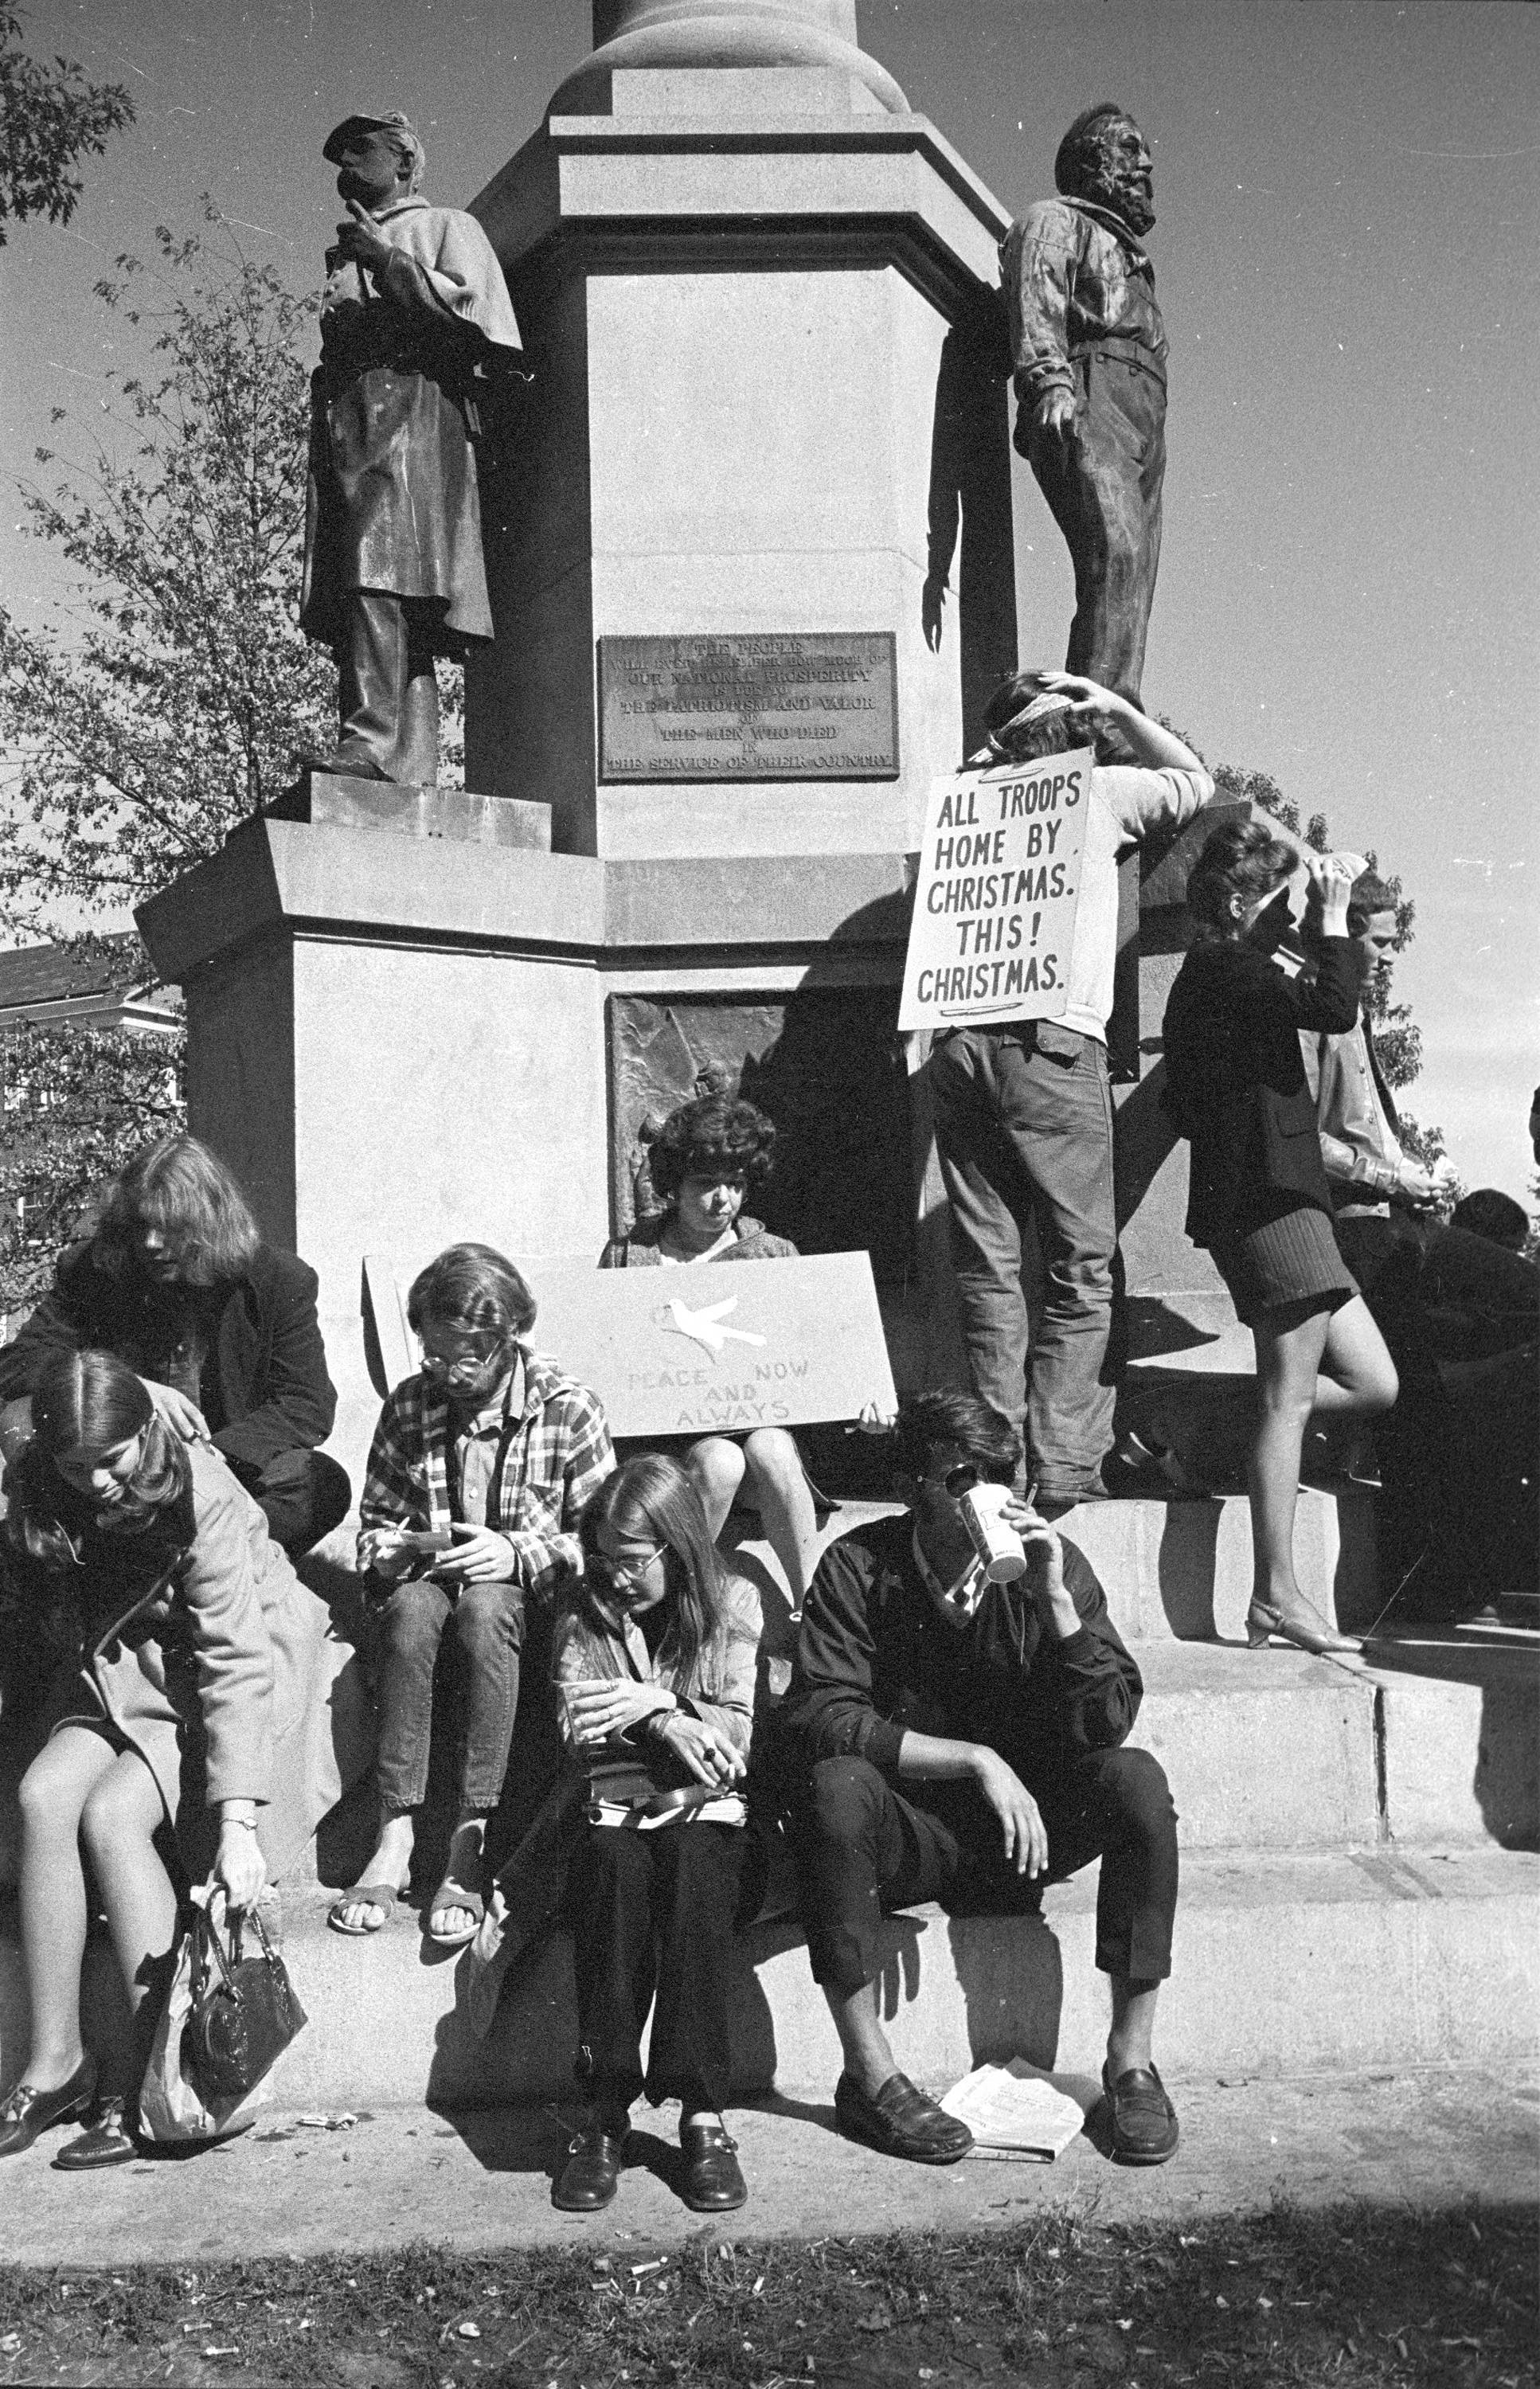 Students protest the Vietnam War at the base of the monument in October 1969. Photo courtesy the Mahn Center for Archives & Special Collections